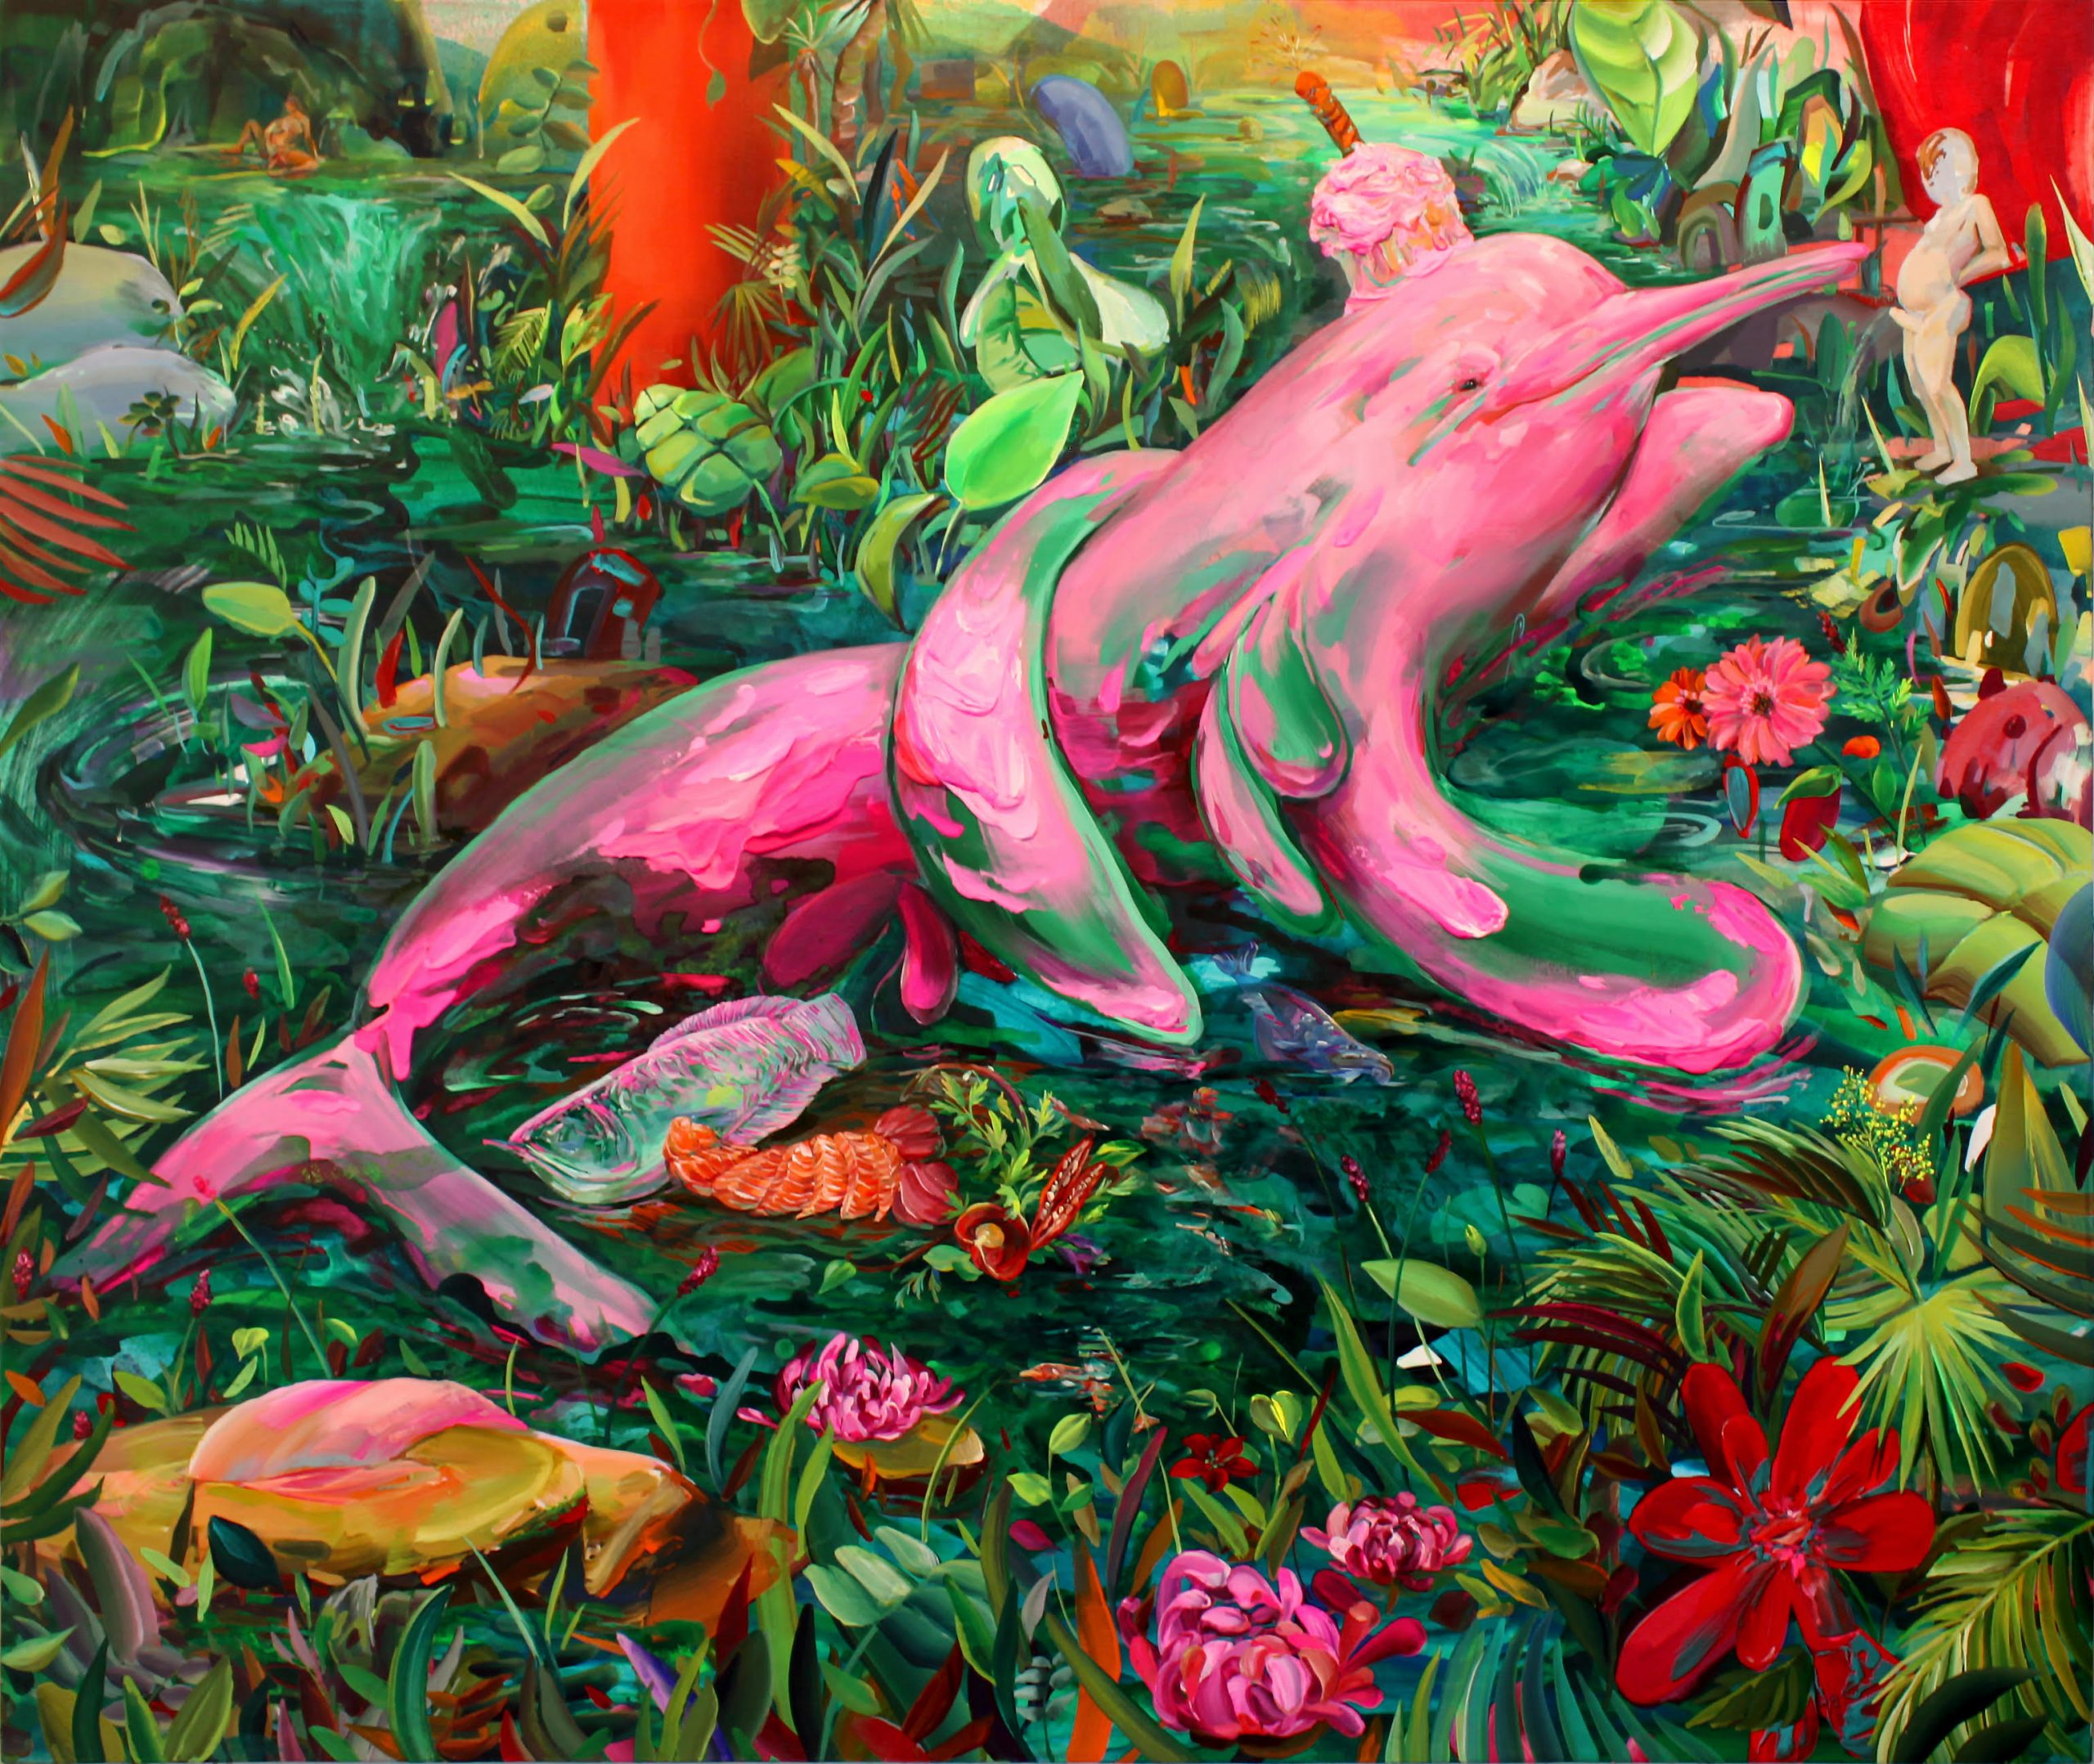 In this lusciously painted oil painting, a melting pink dolphin with a cupcake and an erect penis candle on its head takes center stage in a tropical stream filled with fish and sashimi slices. The dolphin is caught in the embrace of another dolphin. Its nose gestures at a miniature white naked man-child with a blurred face. The white figure is standing on a leaf in the upper right-hand corner of the painting and urinating into the stream with his arms tucked behind his back. Vibrant large pink, red, and orange flowers draw attention amidst abundant green foliage. Hazy sunlight in yellows and pinks is visible in the background.